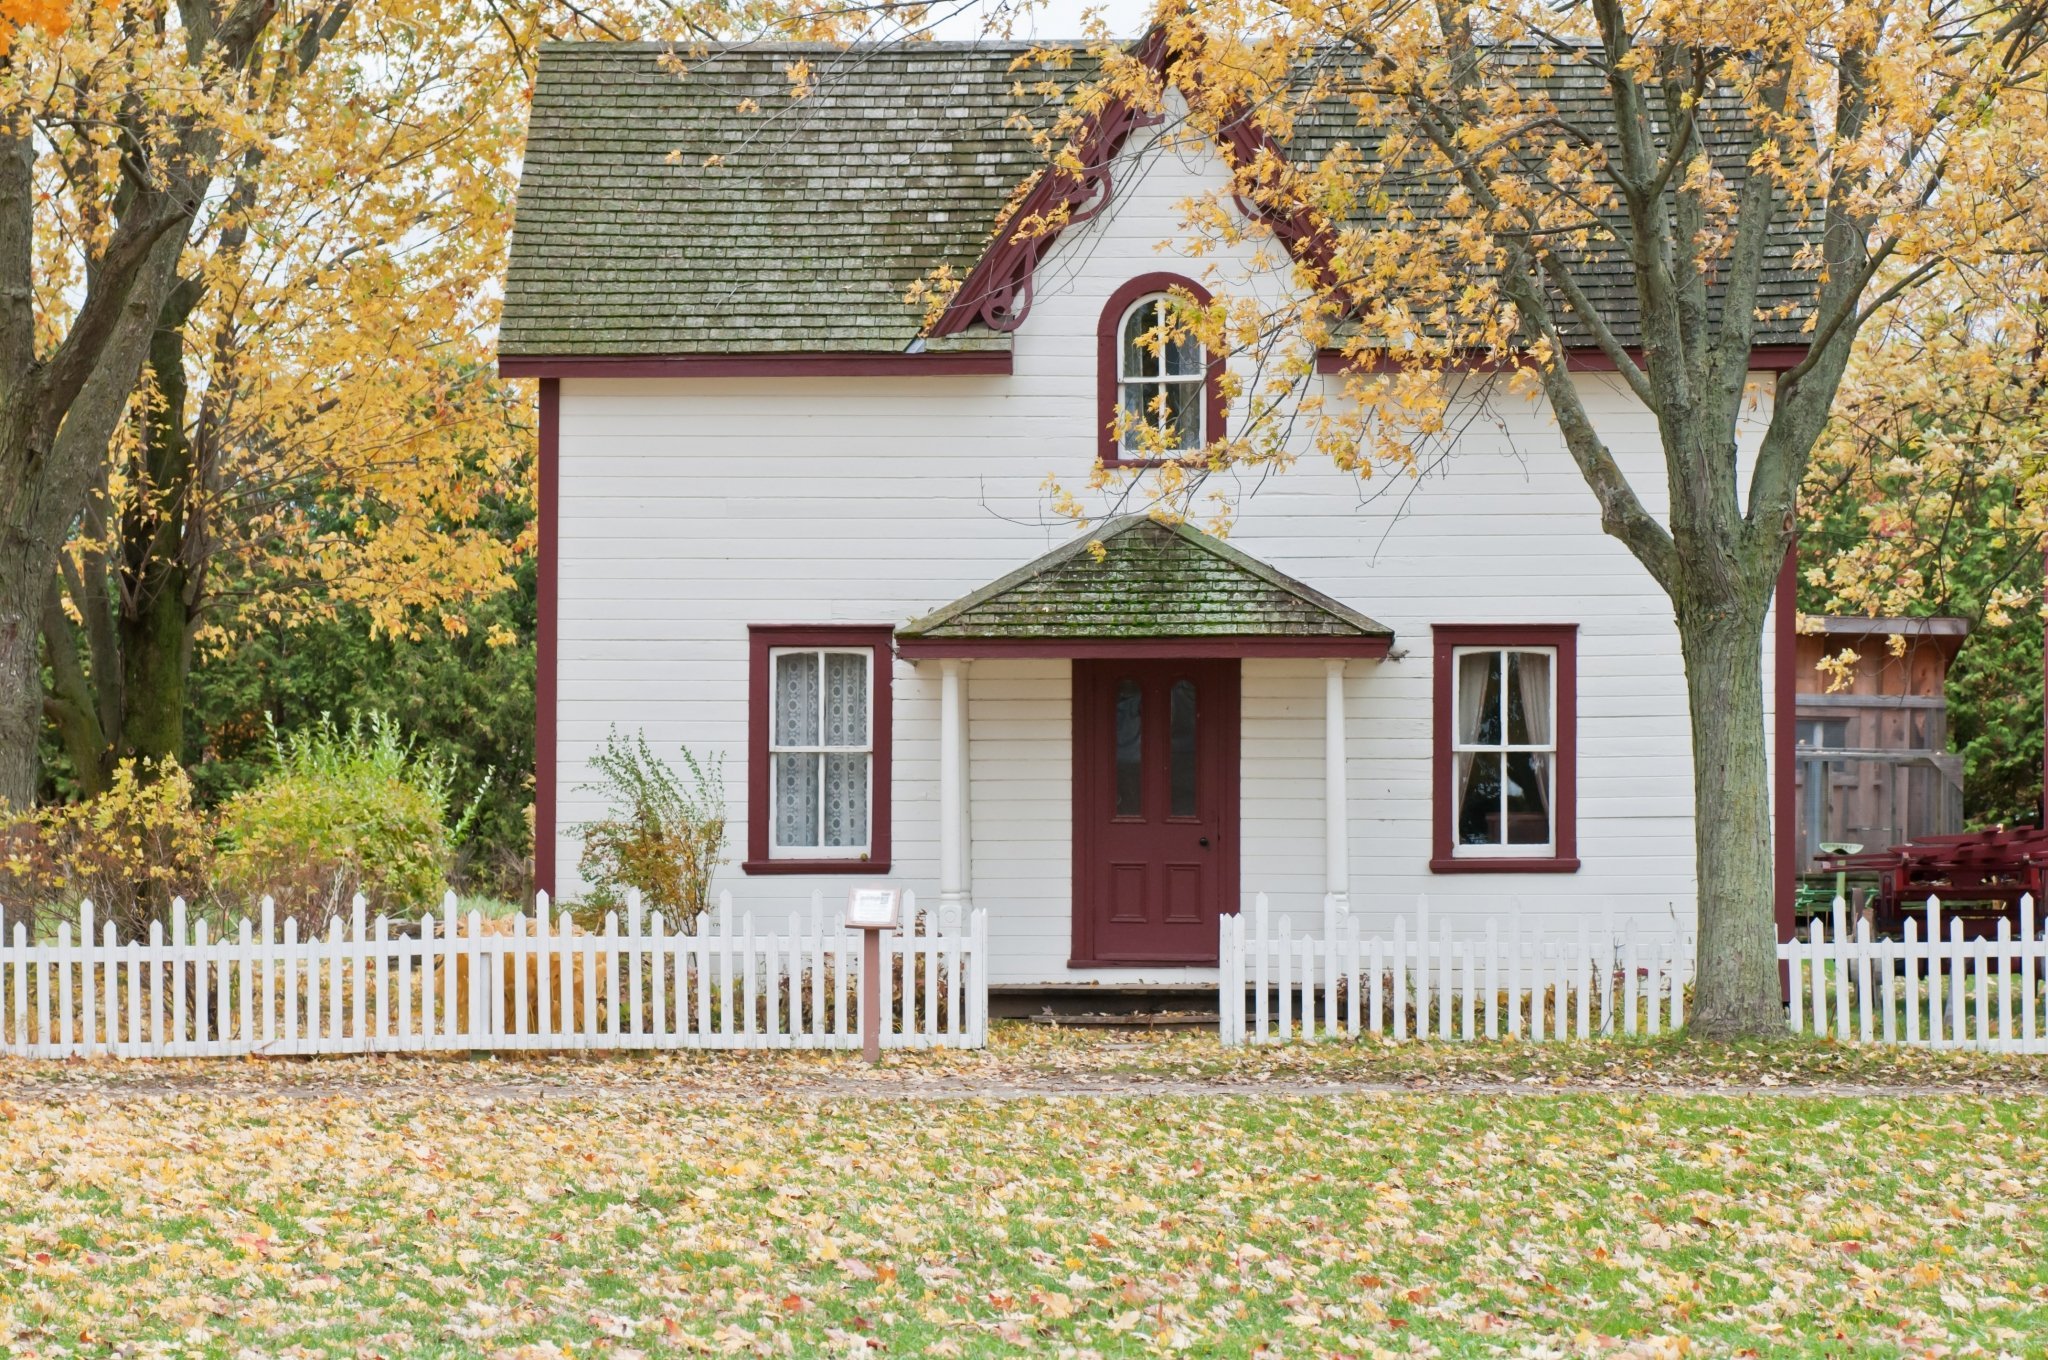 10 Mistakes First Time Home Buyers Need to Avoid